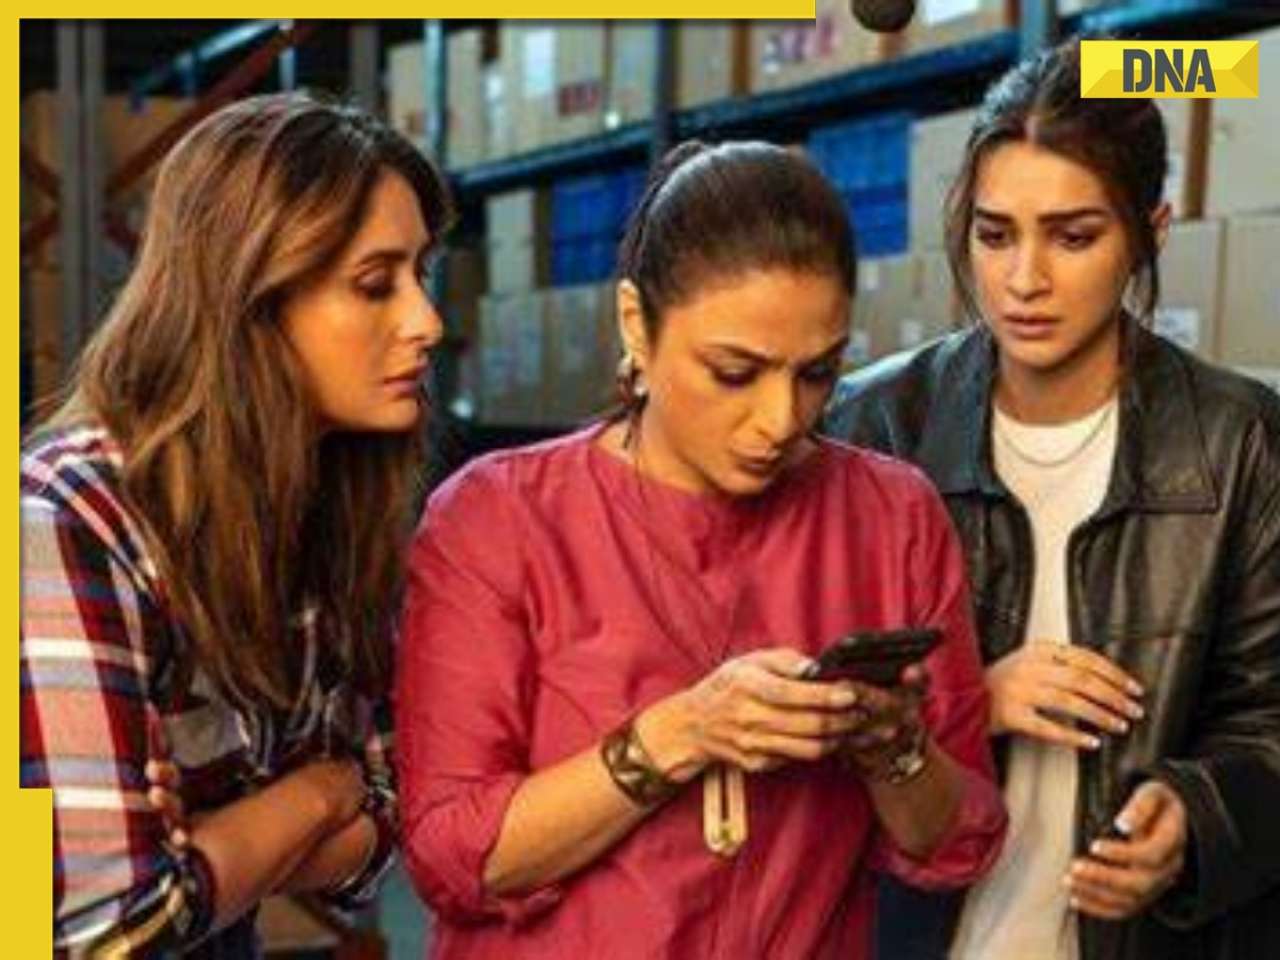 Crew box office collection day 4: Kareena, Tabu, Kriti's film holds well on first Monday, collects Rs 4.50 crore 